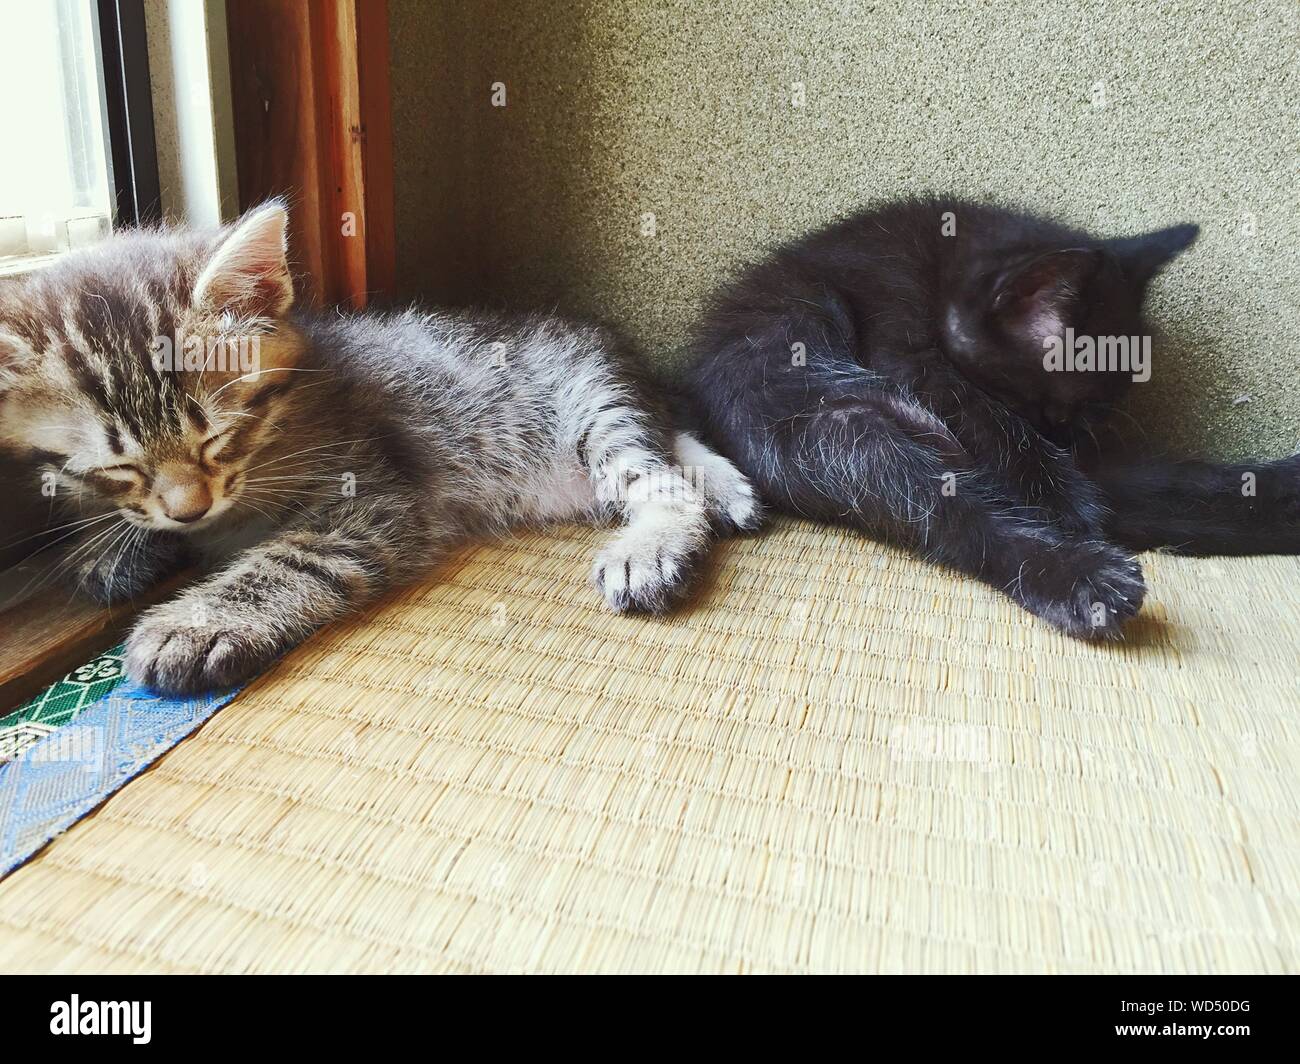 Cute Kittens Sleeping At Home Stock Photo